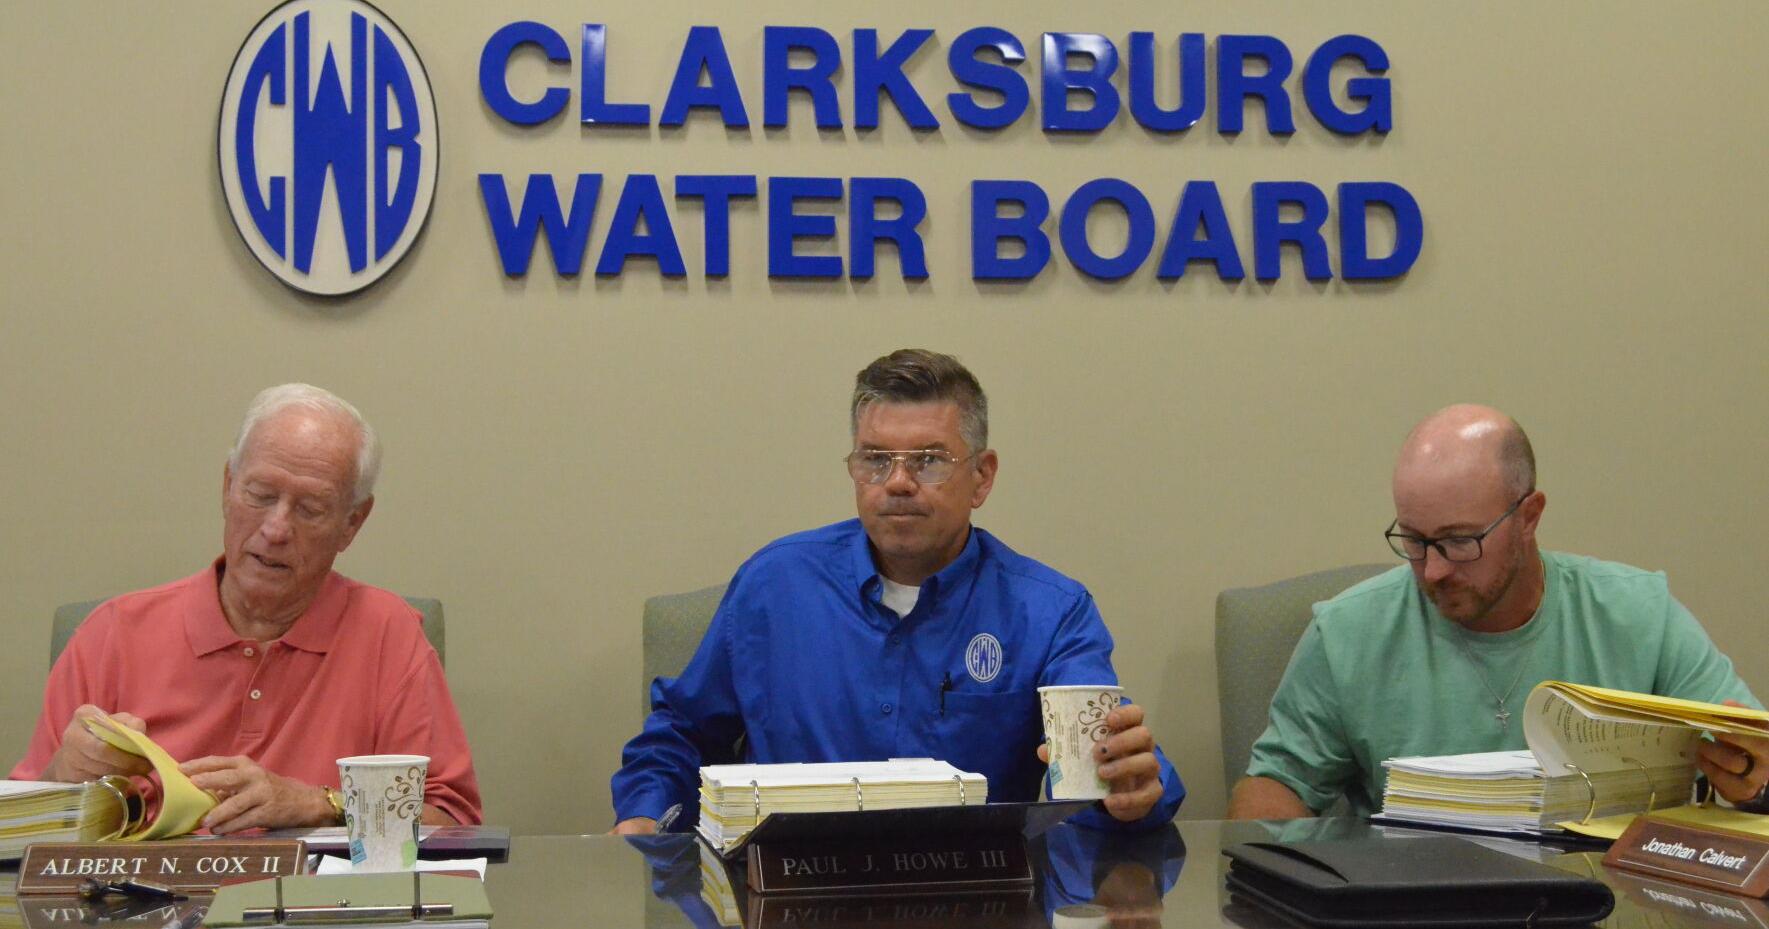 Clarksburg Water Board will offer drawing for free water as survey incentive